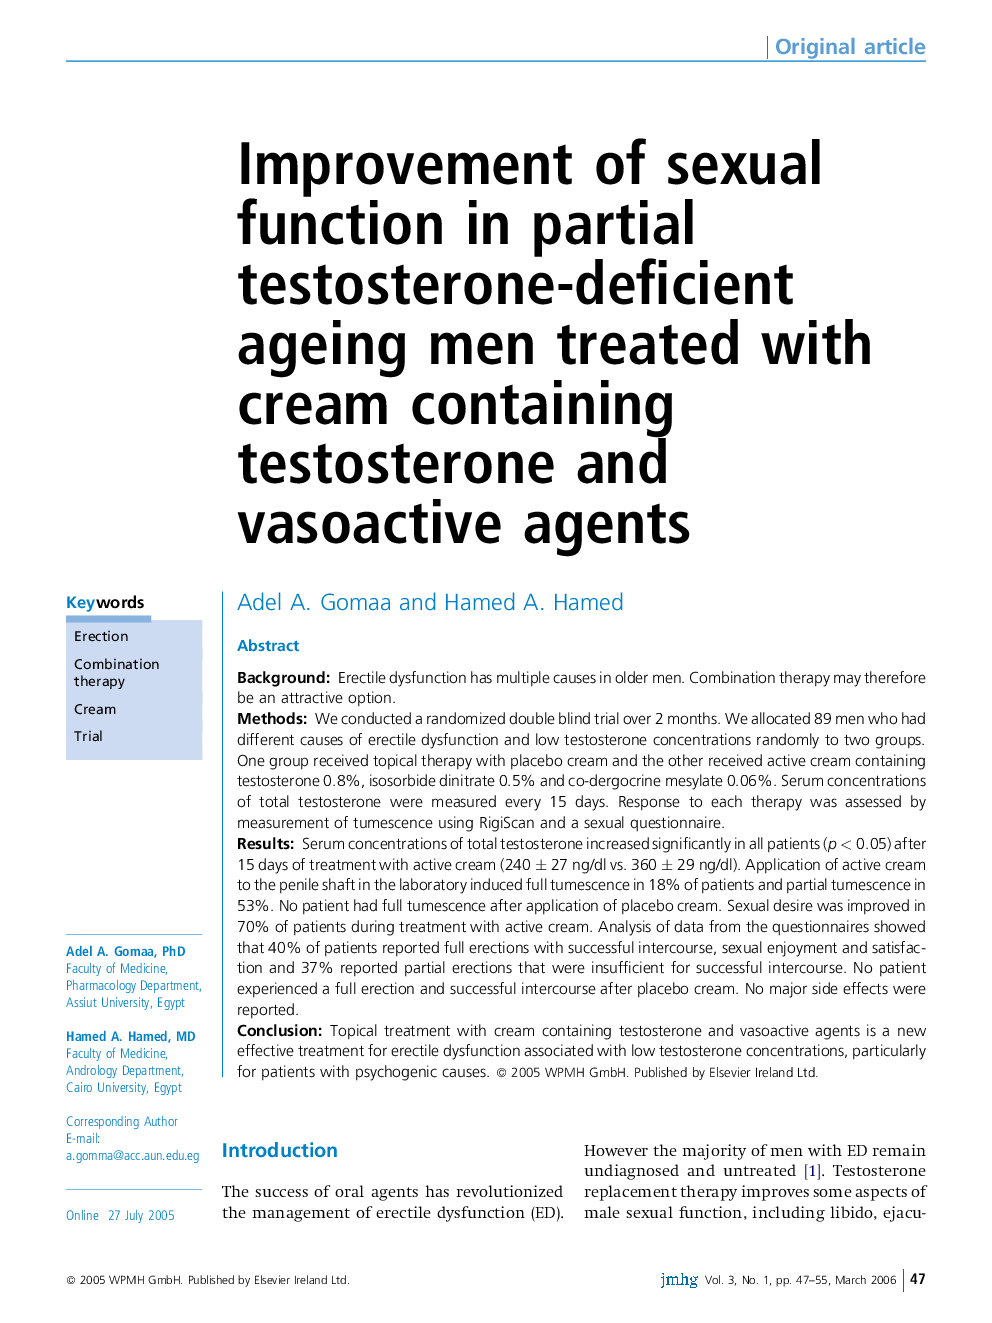 Improvement of sexual function in partial testosterone-deficient ageing men treated with cream containing testosterone and vasoactive agents